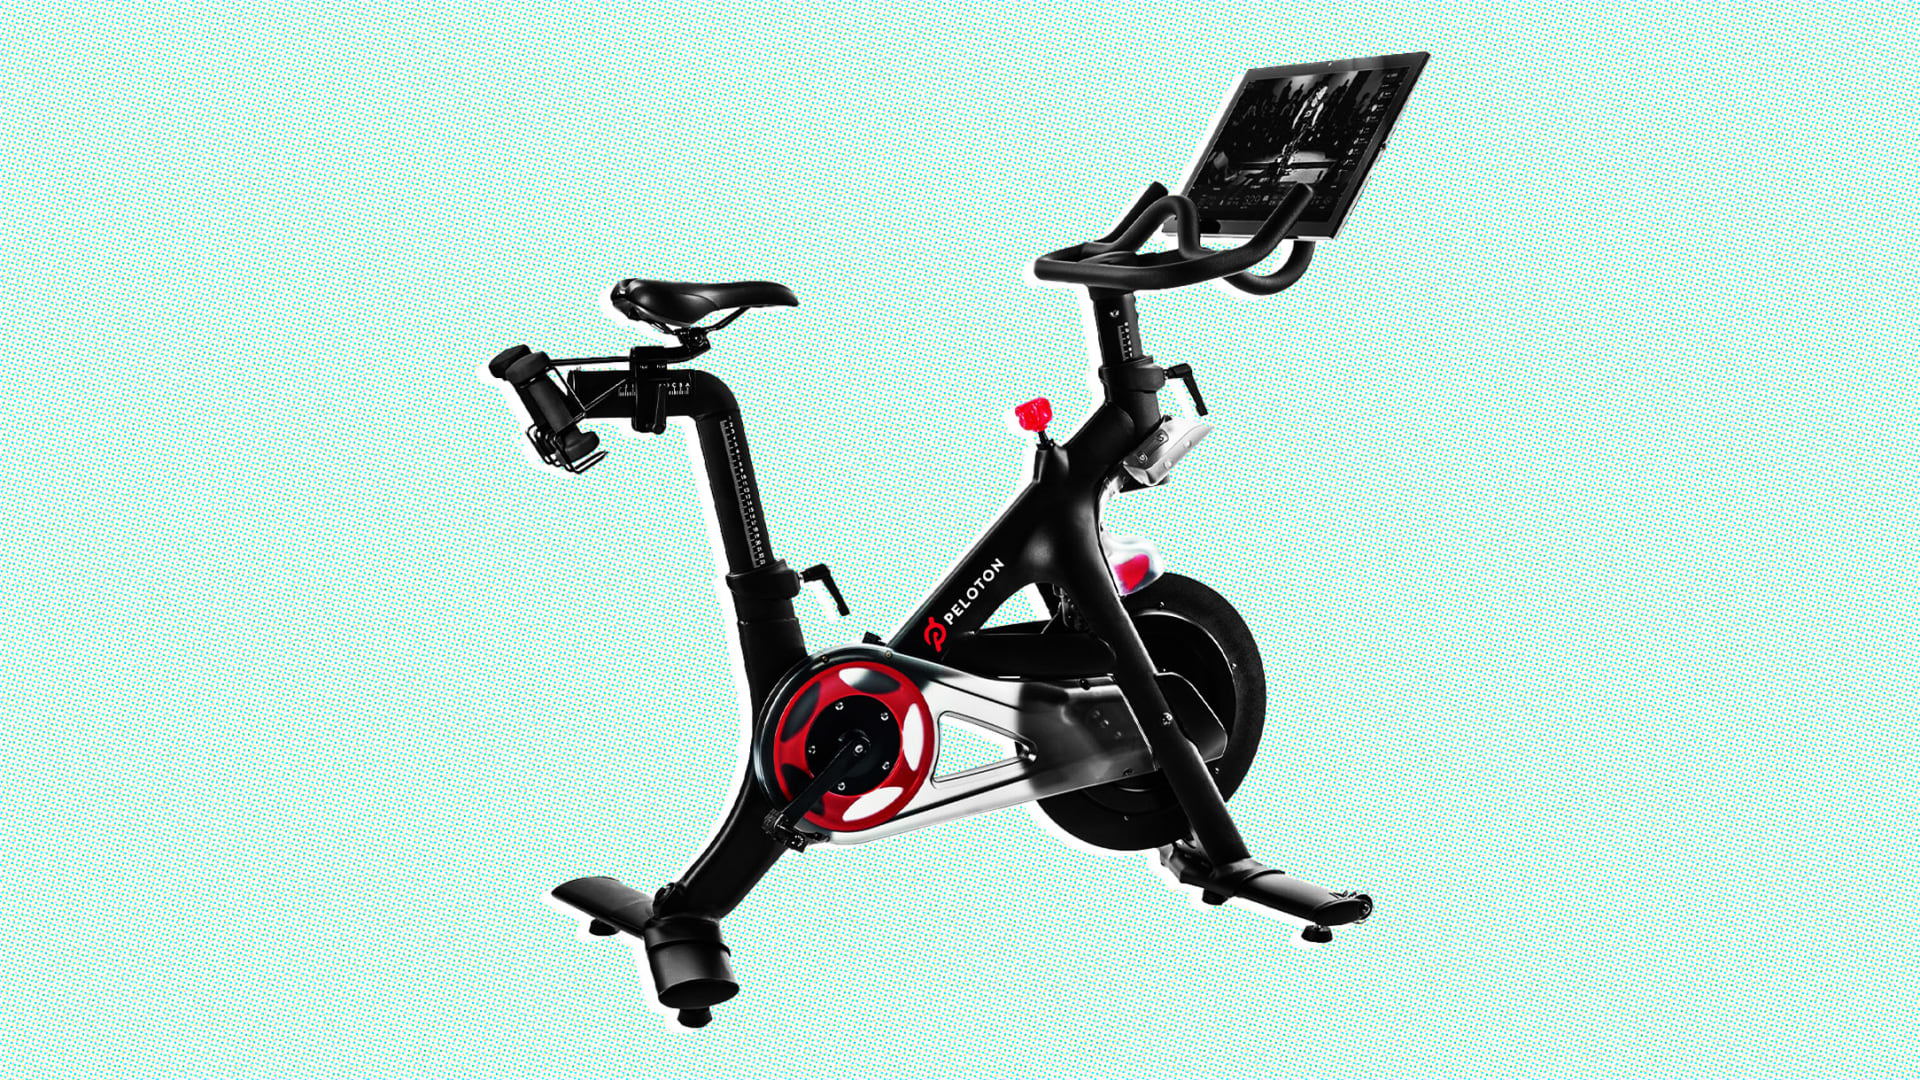 Internal Documents Reveal the Marketing Strategy Peloton Used to Become a $1.8 Billion Company